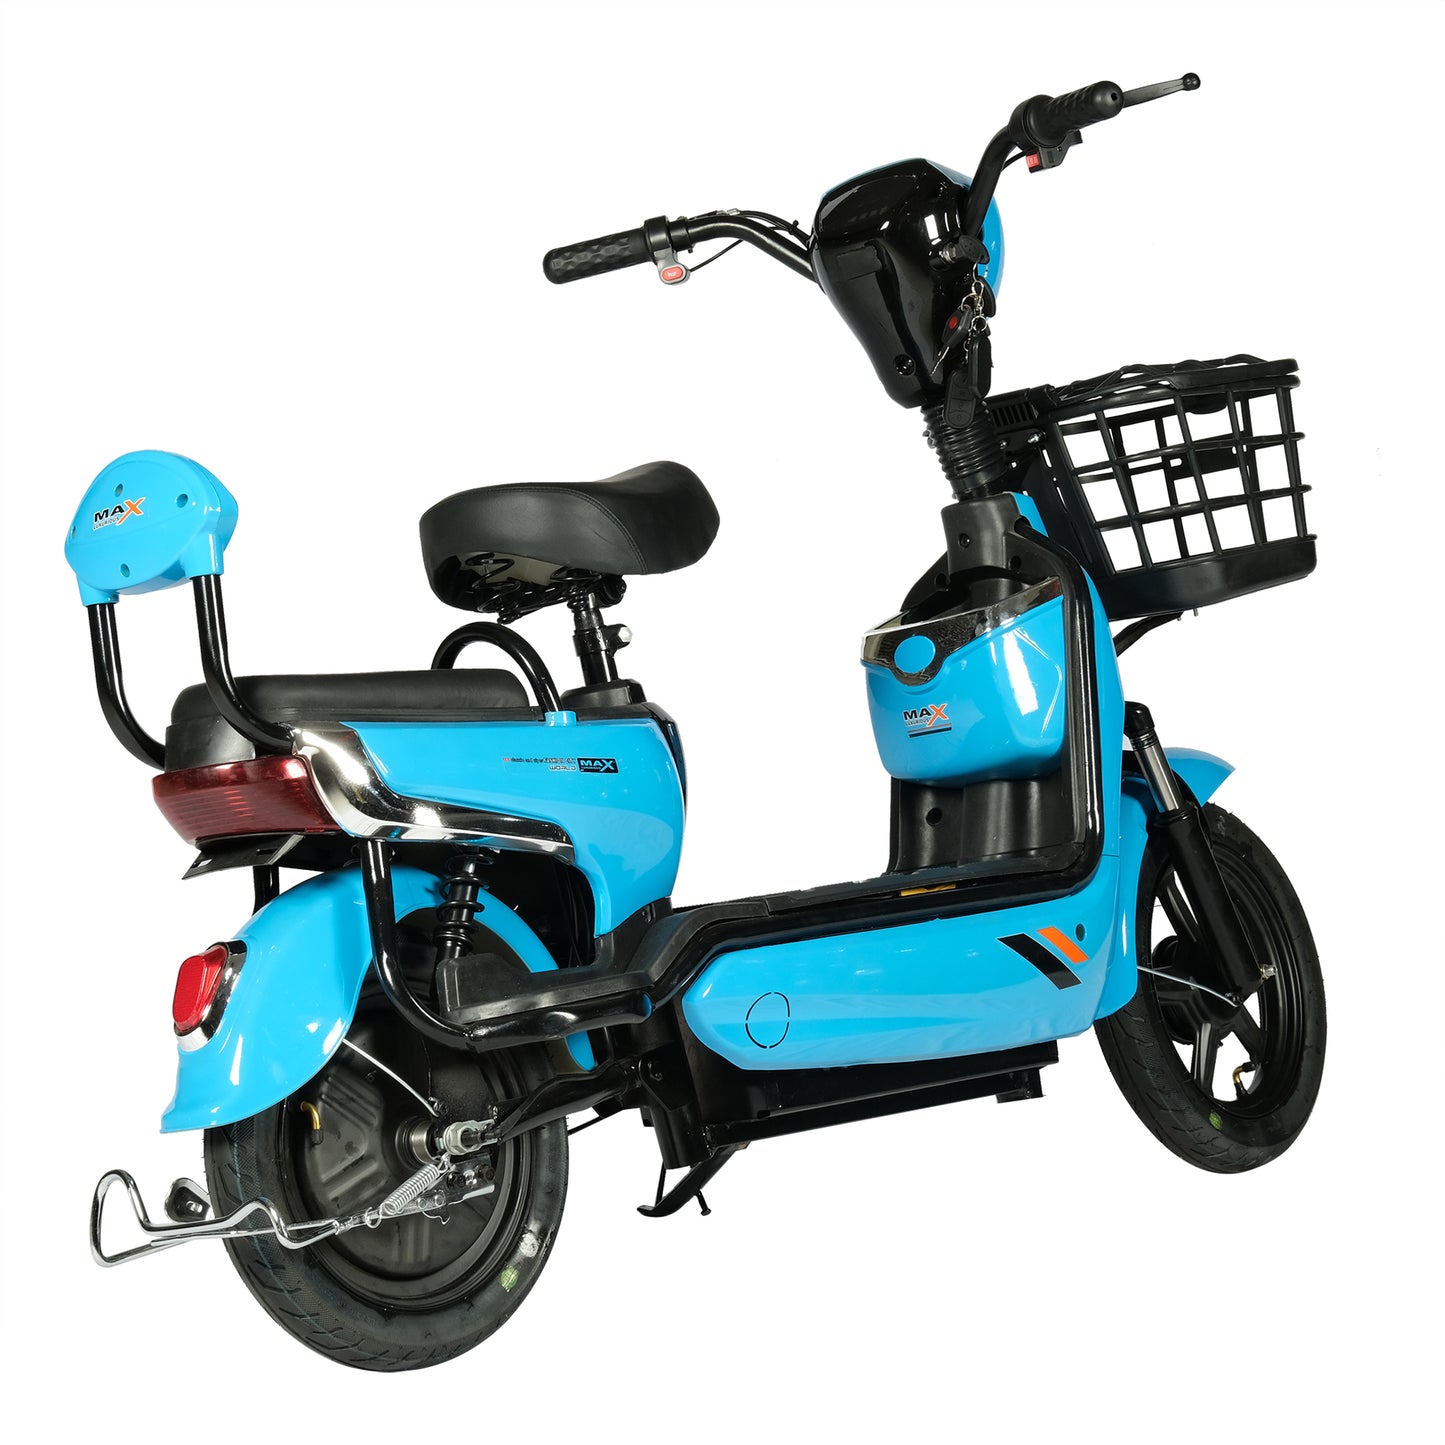 CRONY W3 motorcycle electric bike 350W 48V electric motorcycle Electric Bicycles